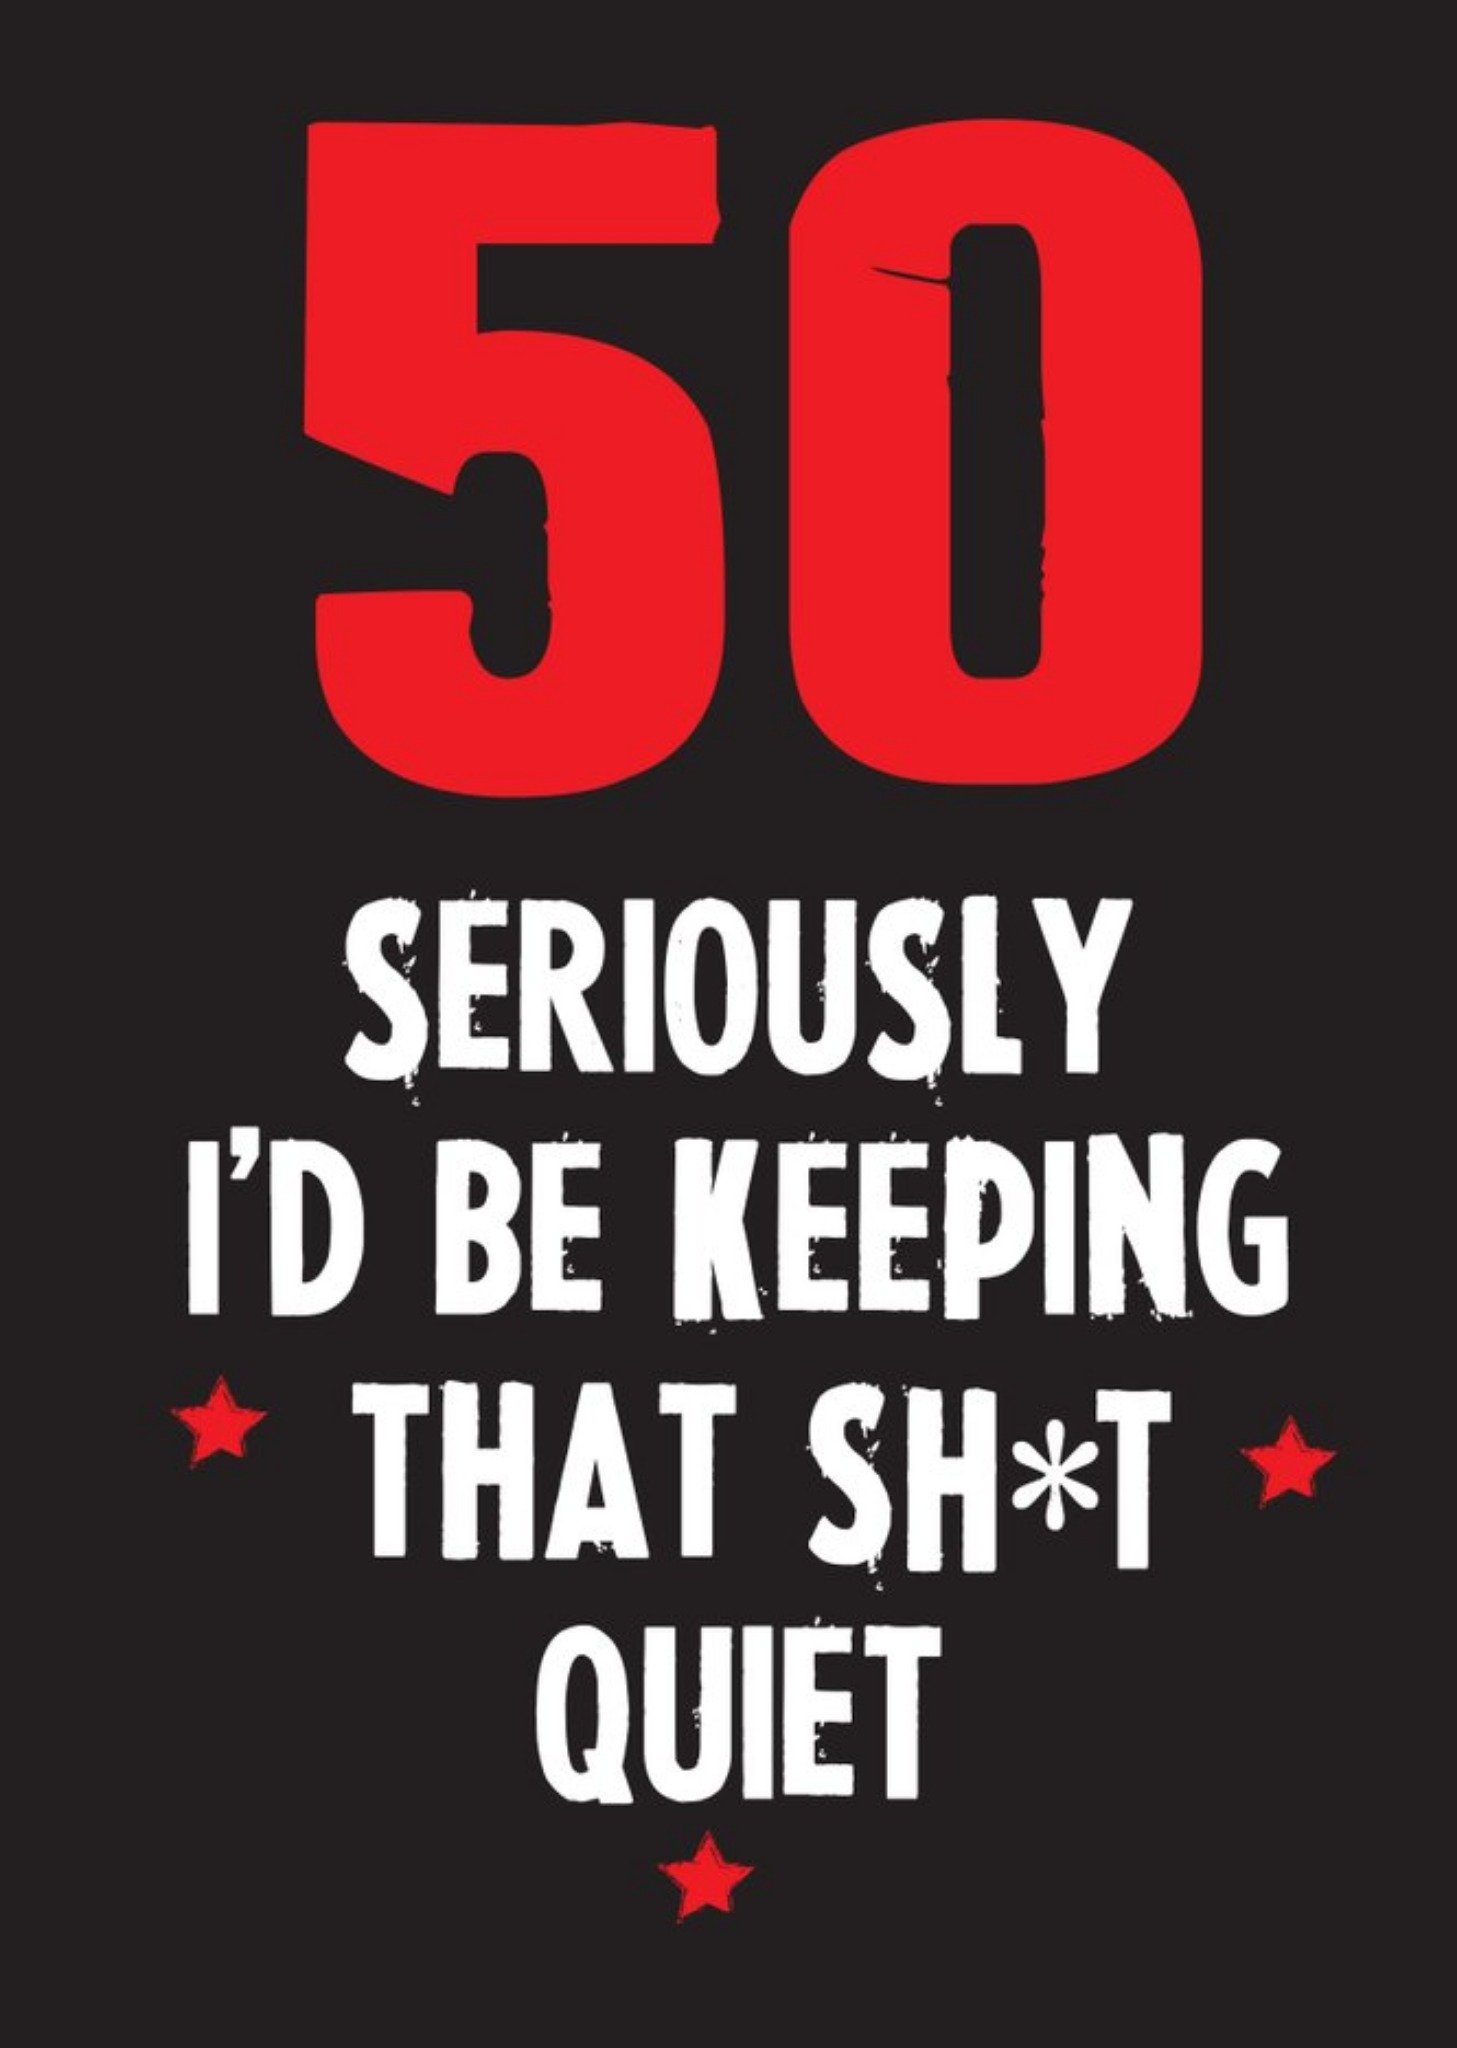 Moonpig Funny Cheeky Chops 50 Seriously Id Be Keeping That Quiet Card Ecard